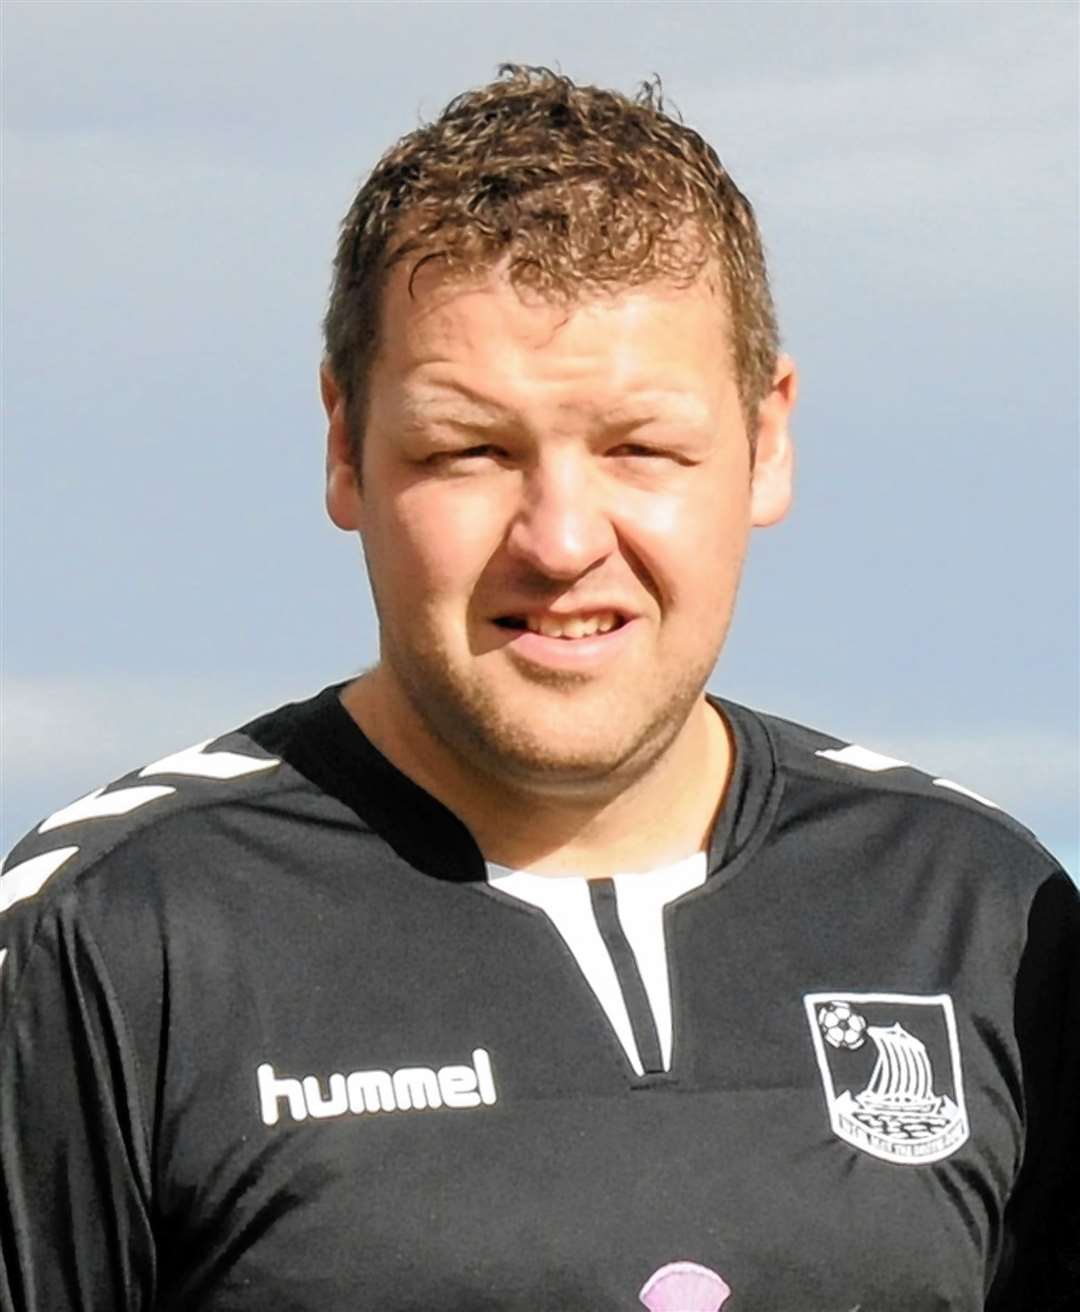 Pastures new beckon for former Buckie Rovers co-manager Kyle Mackay.